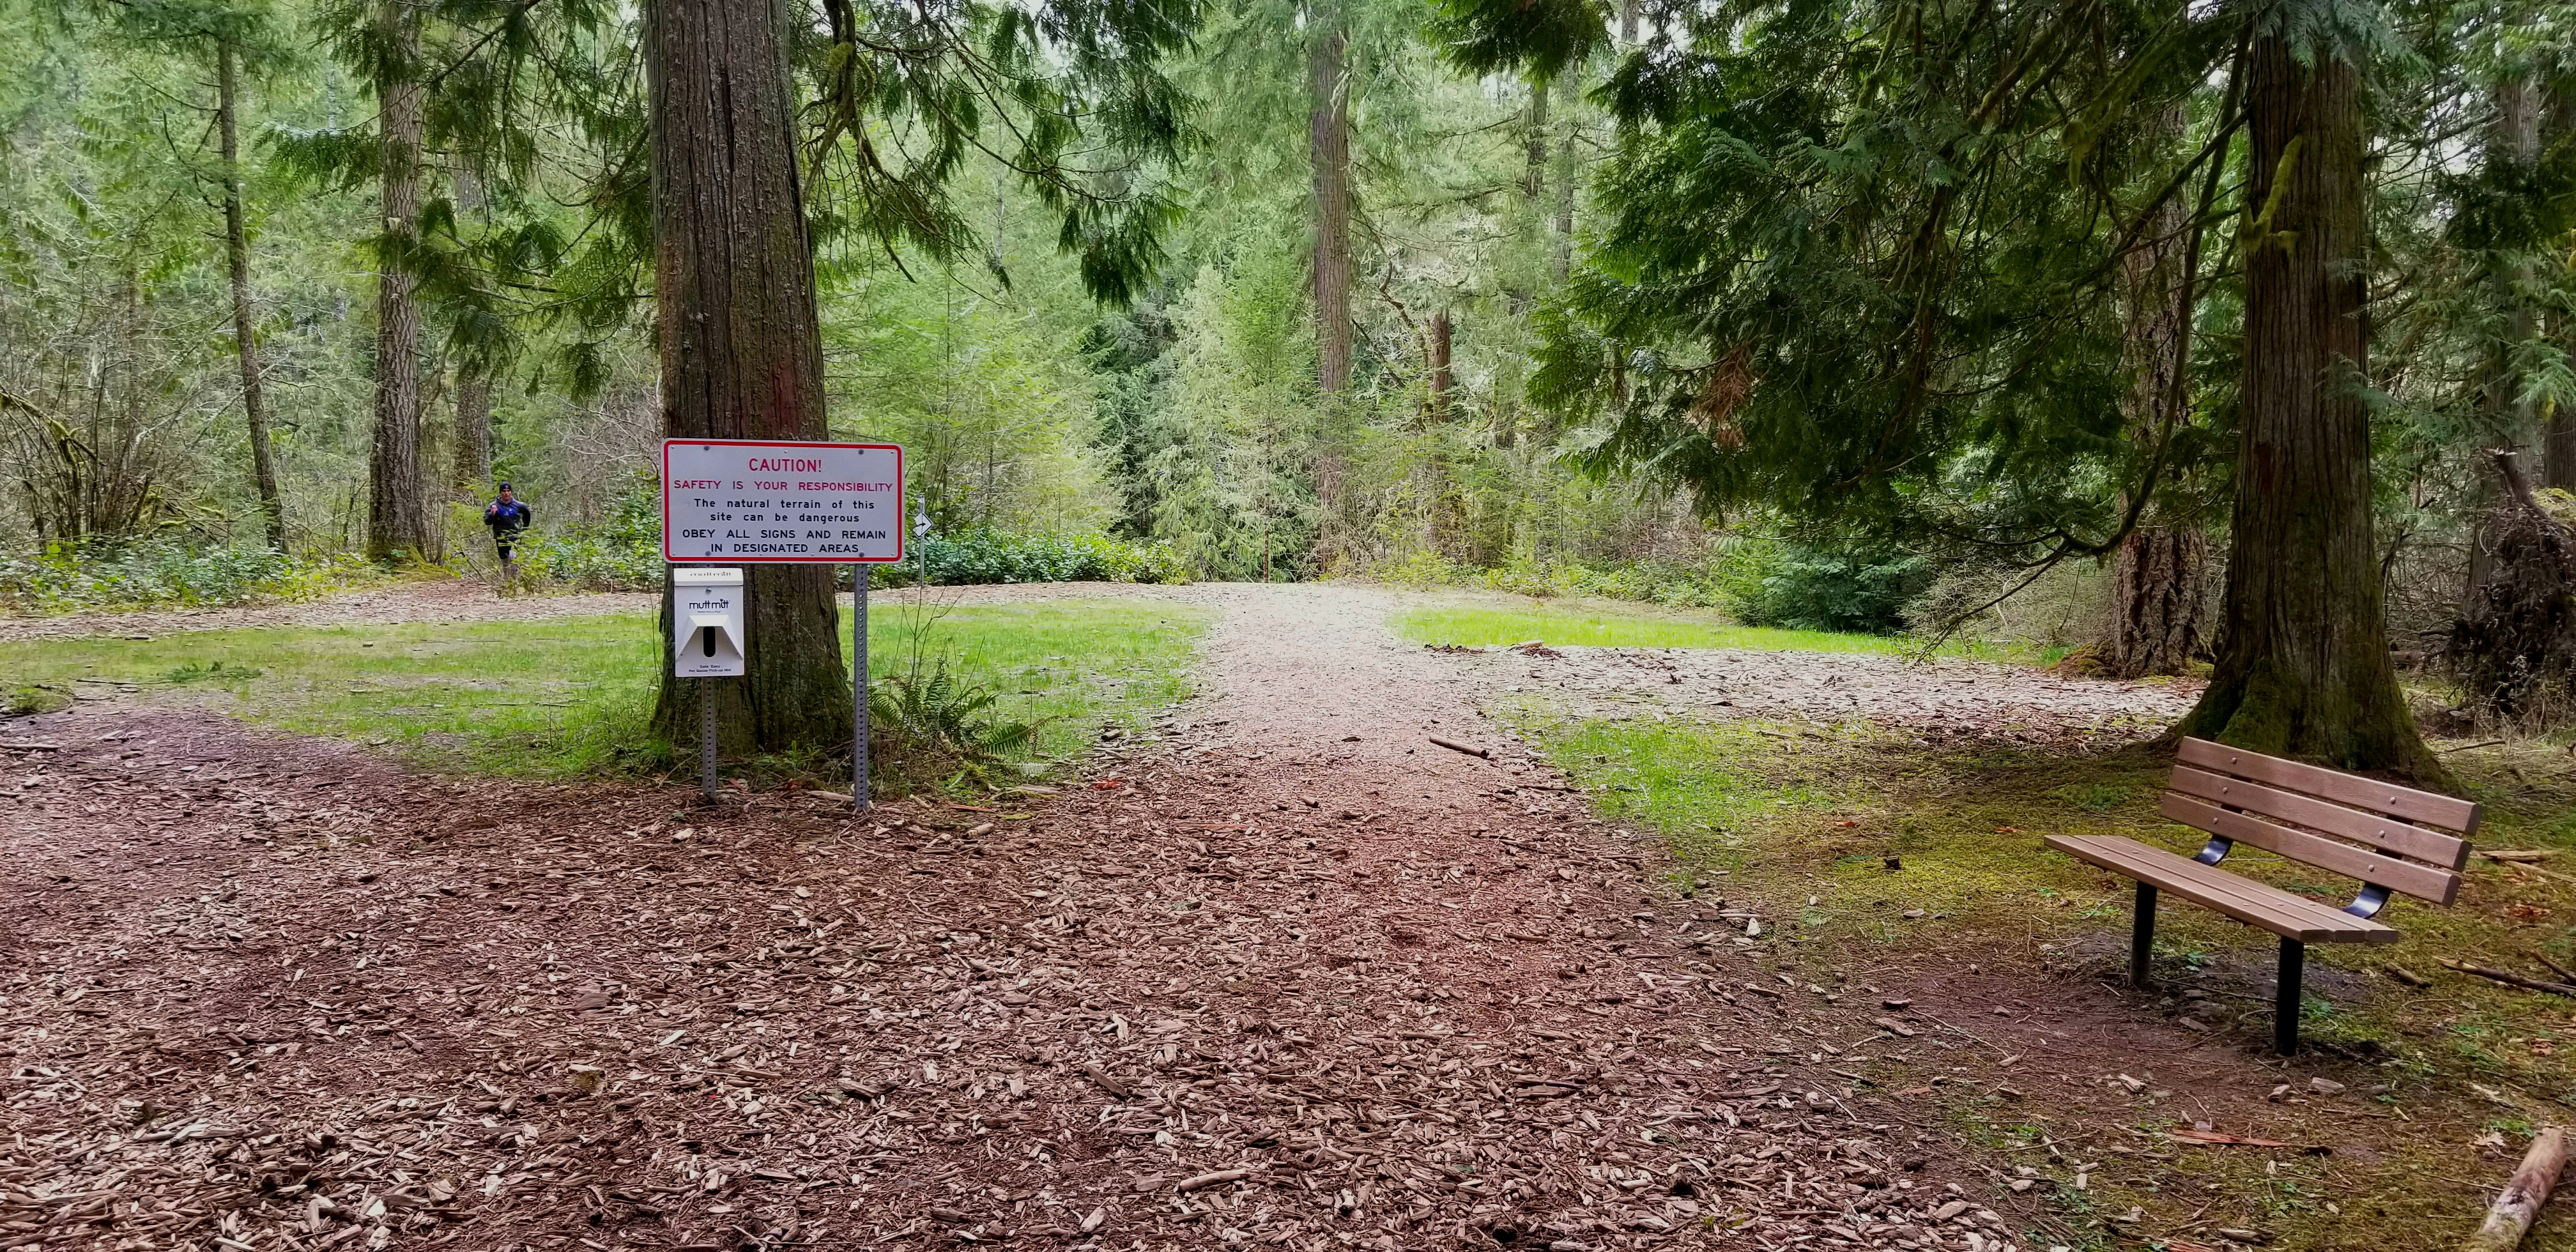 A wood chip trail with a bench on the right. Two large western red cedars frame the trail, with more trees in the background.